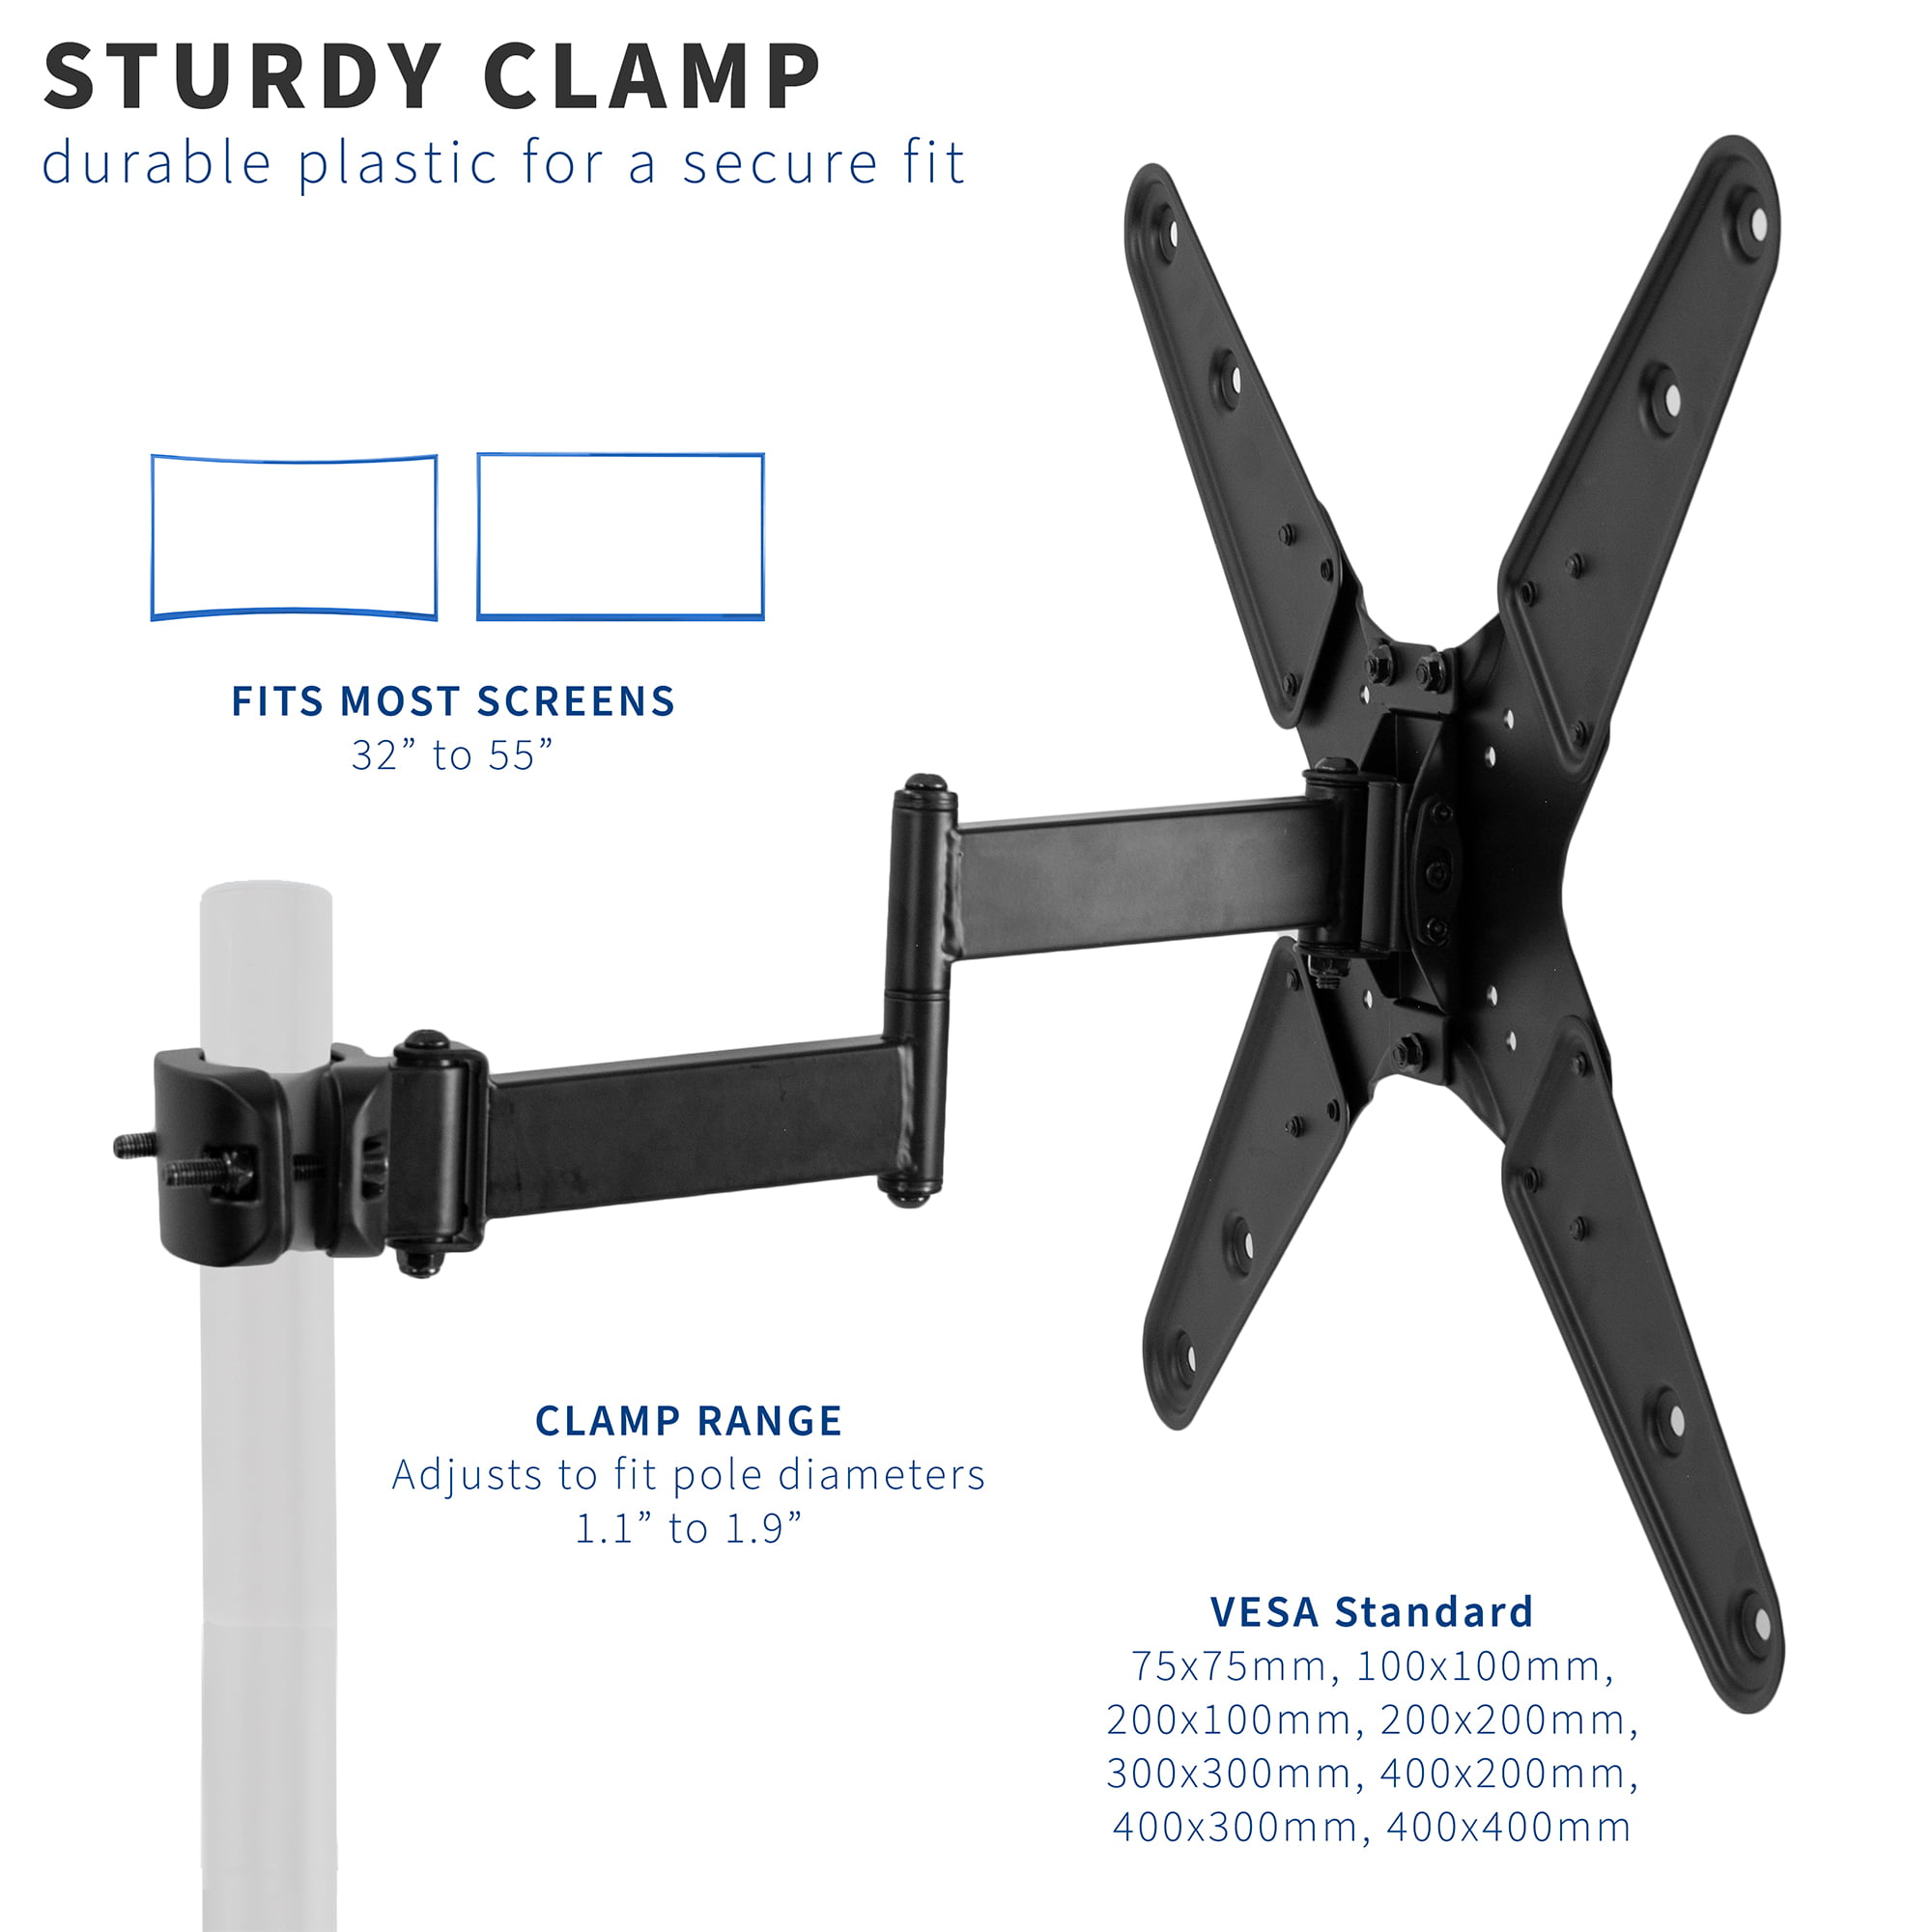 MOUNT-POLE01A Fits 17 to 32 inch Screens VIVO Steel Universal Full Motion Pole Mount Monitor Arm with Removable 75mm and 100mm VESA Plate